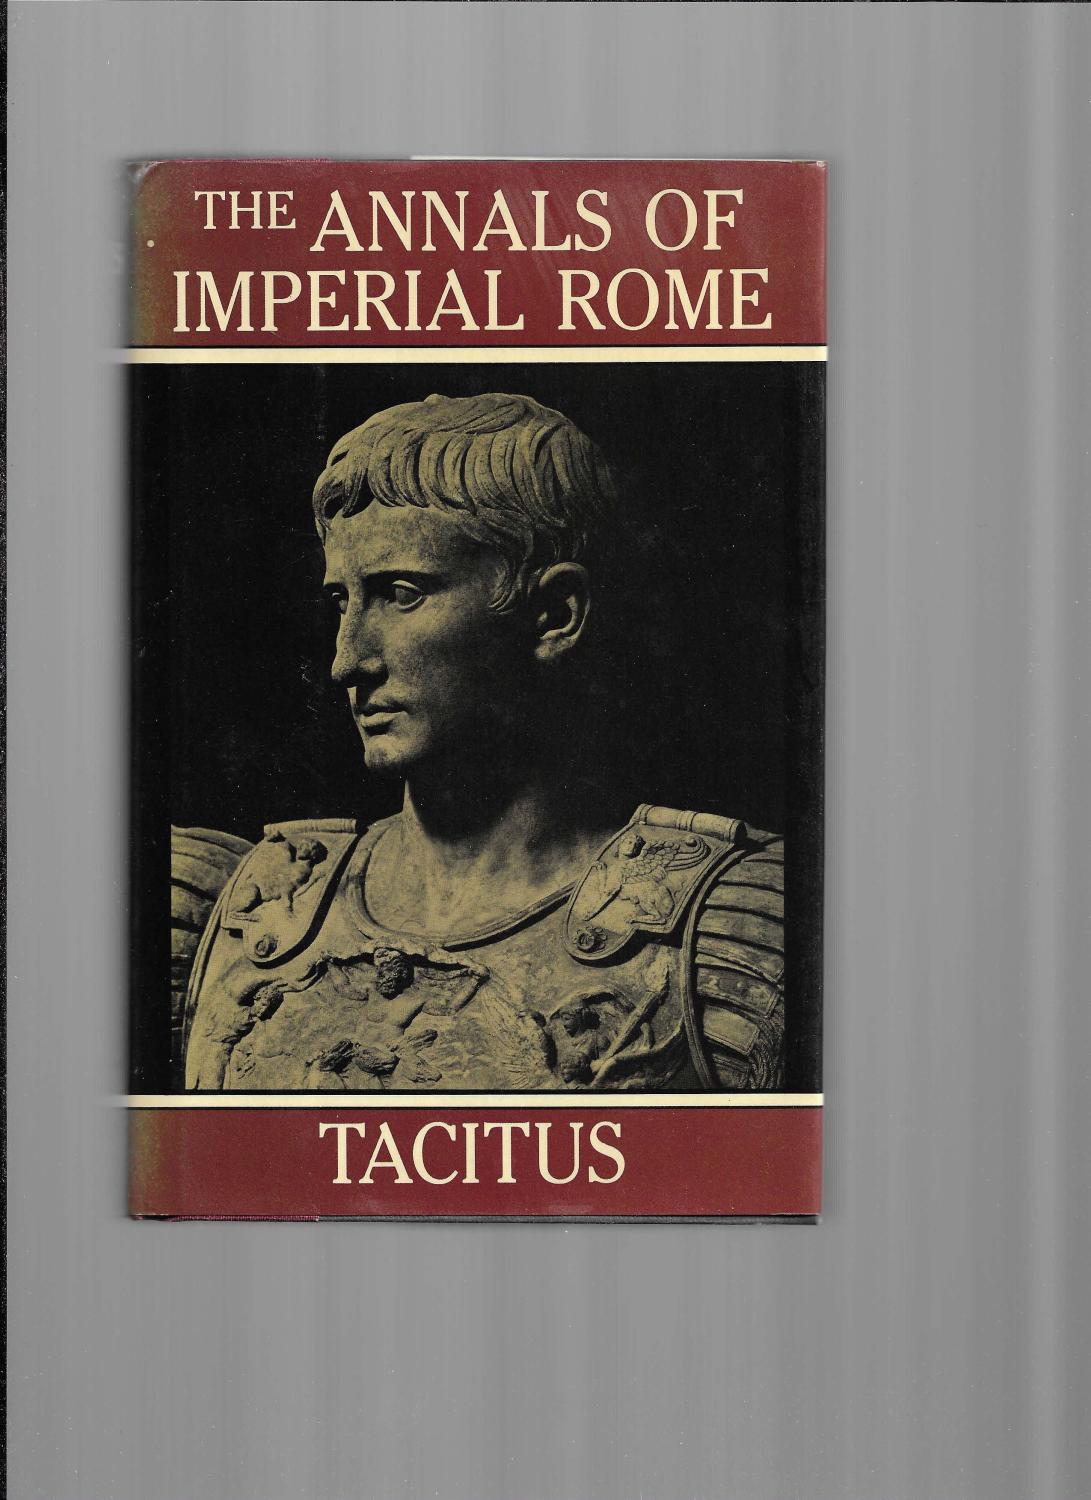 THE ANNALS OF IMPERIAL ROME. Translated With An Introduction By Michael Grant. Revised Edition - Tacitus